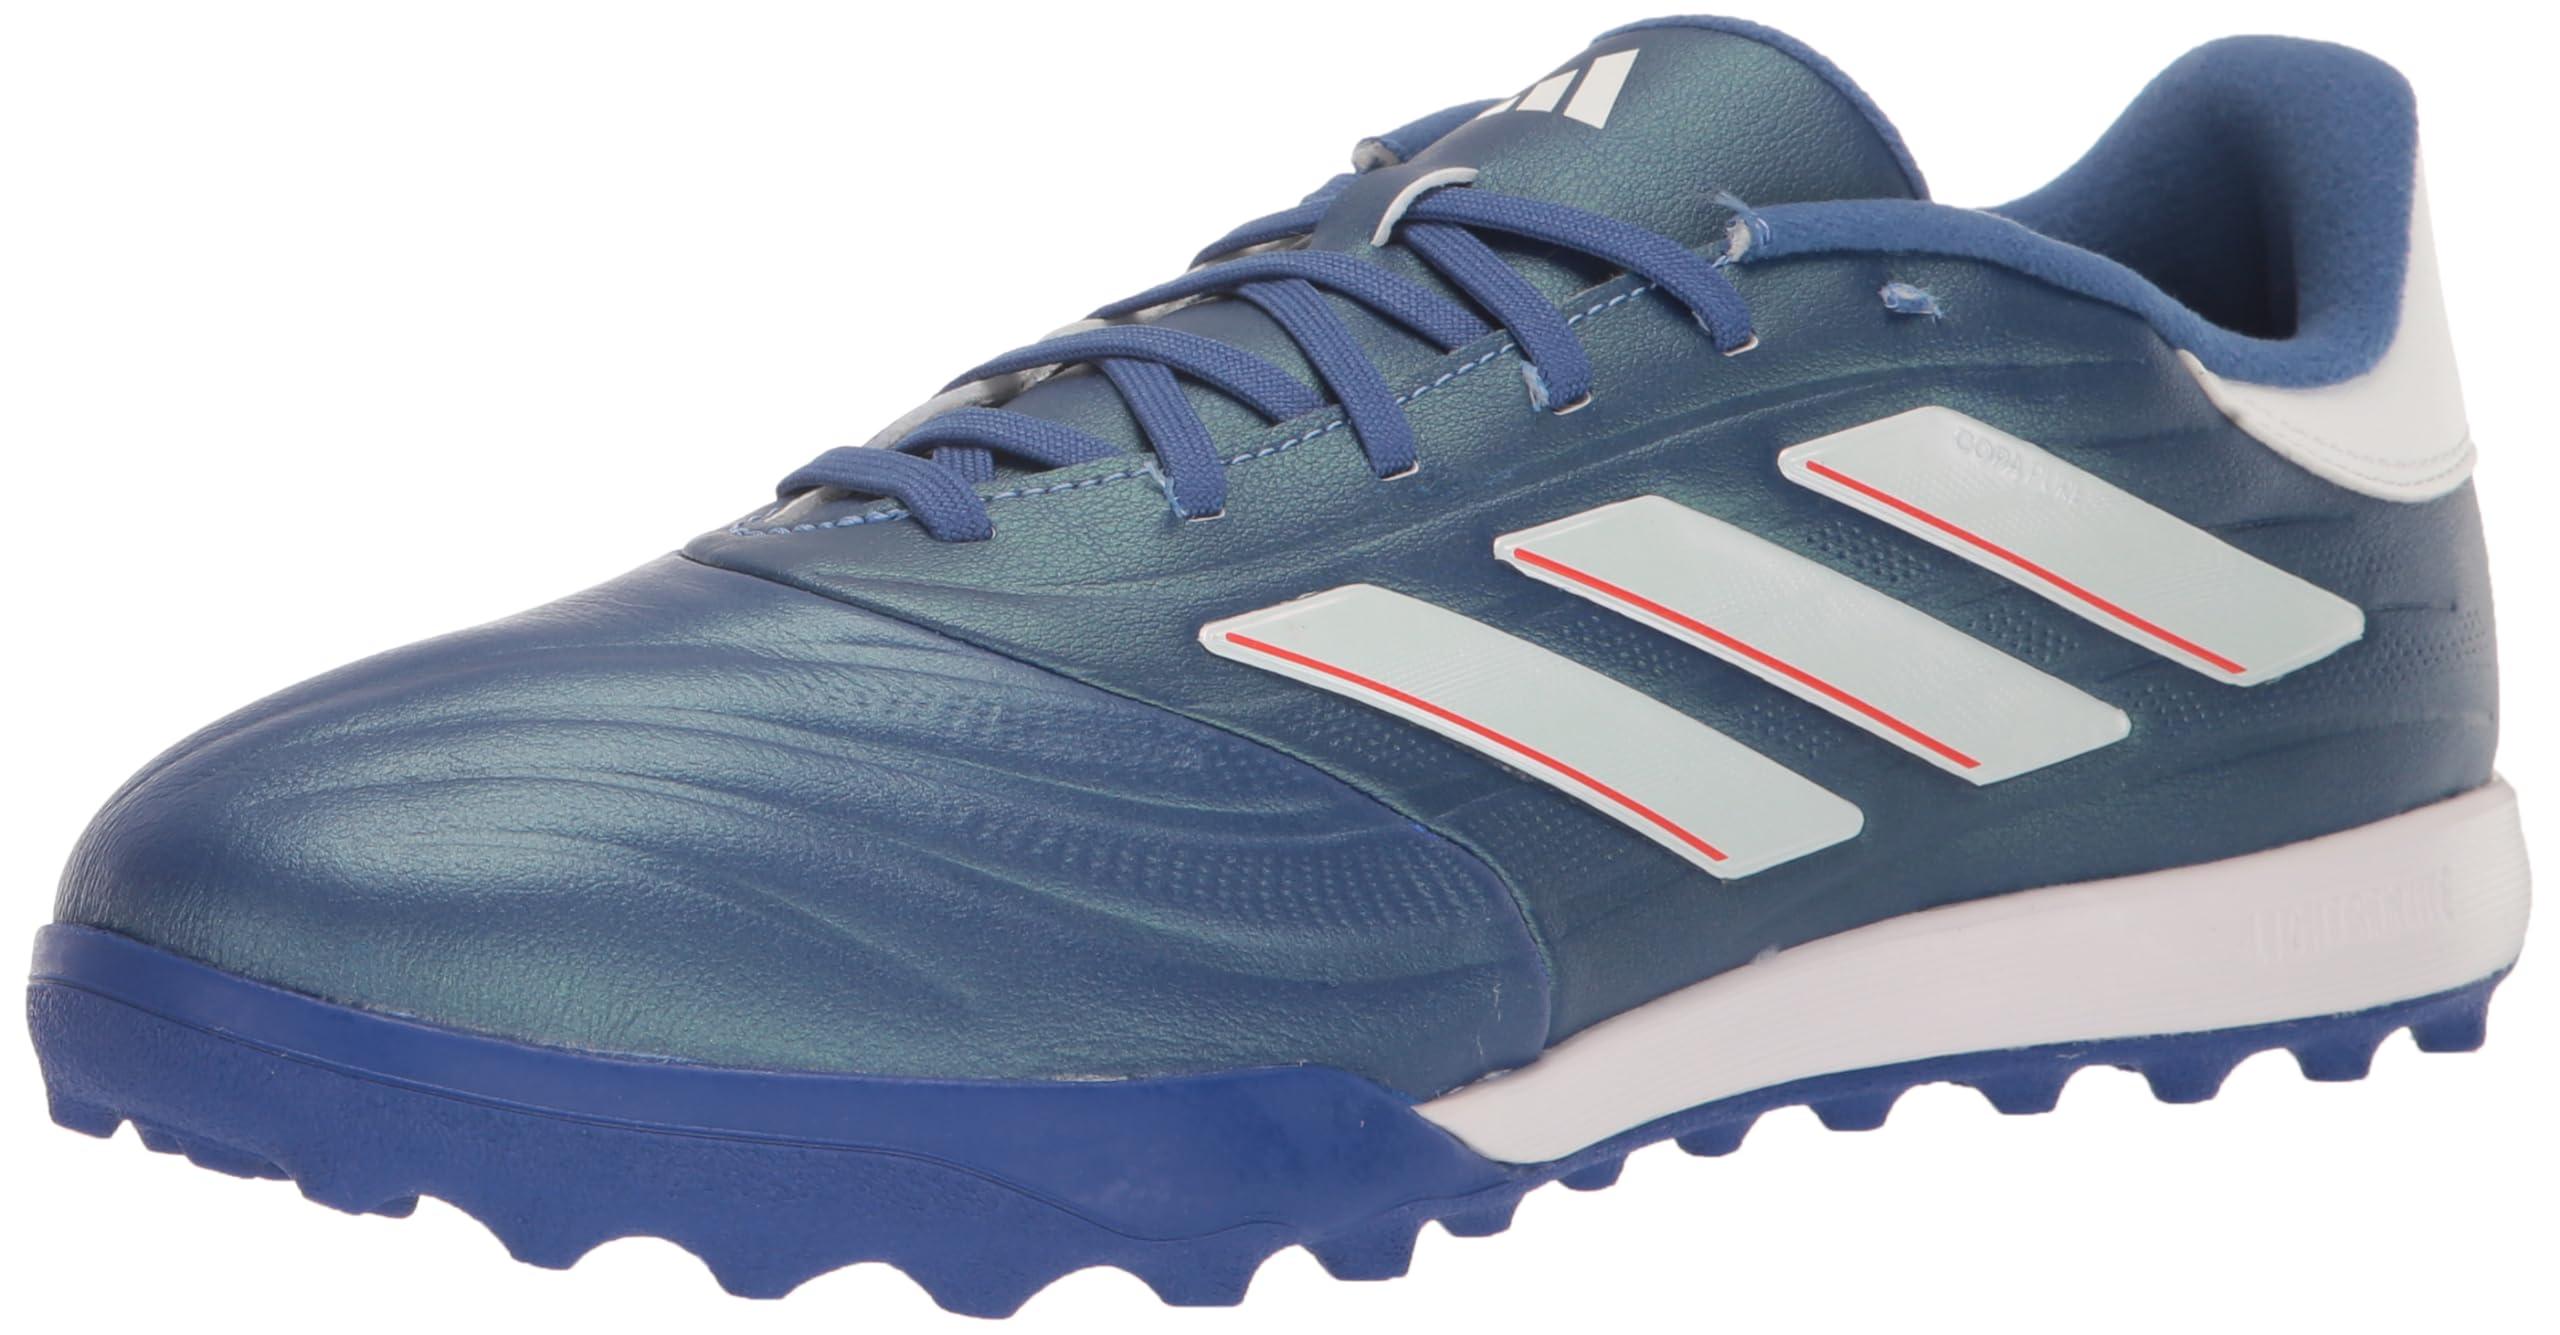 adidas Copa Pure Ii.2 Turf Football Boots Sneaker in Blue | Lyst